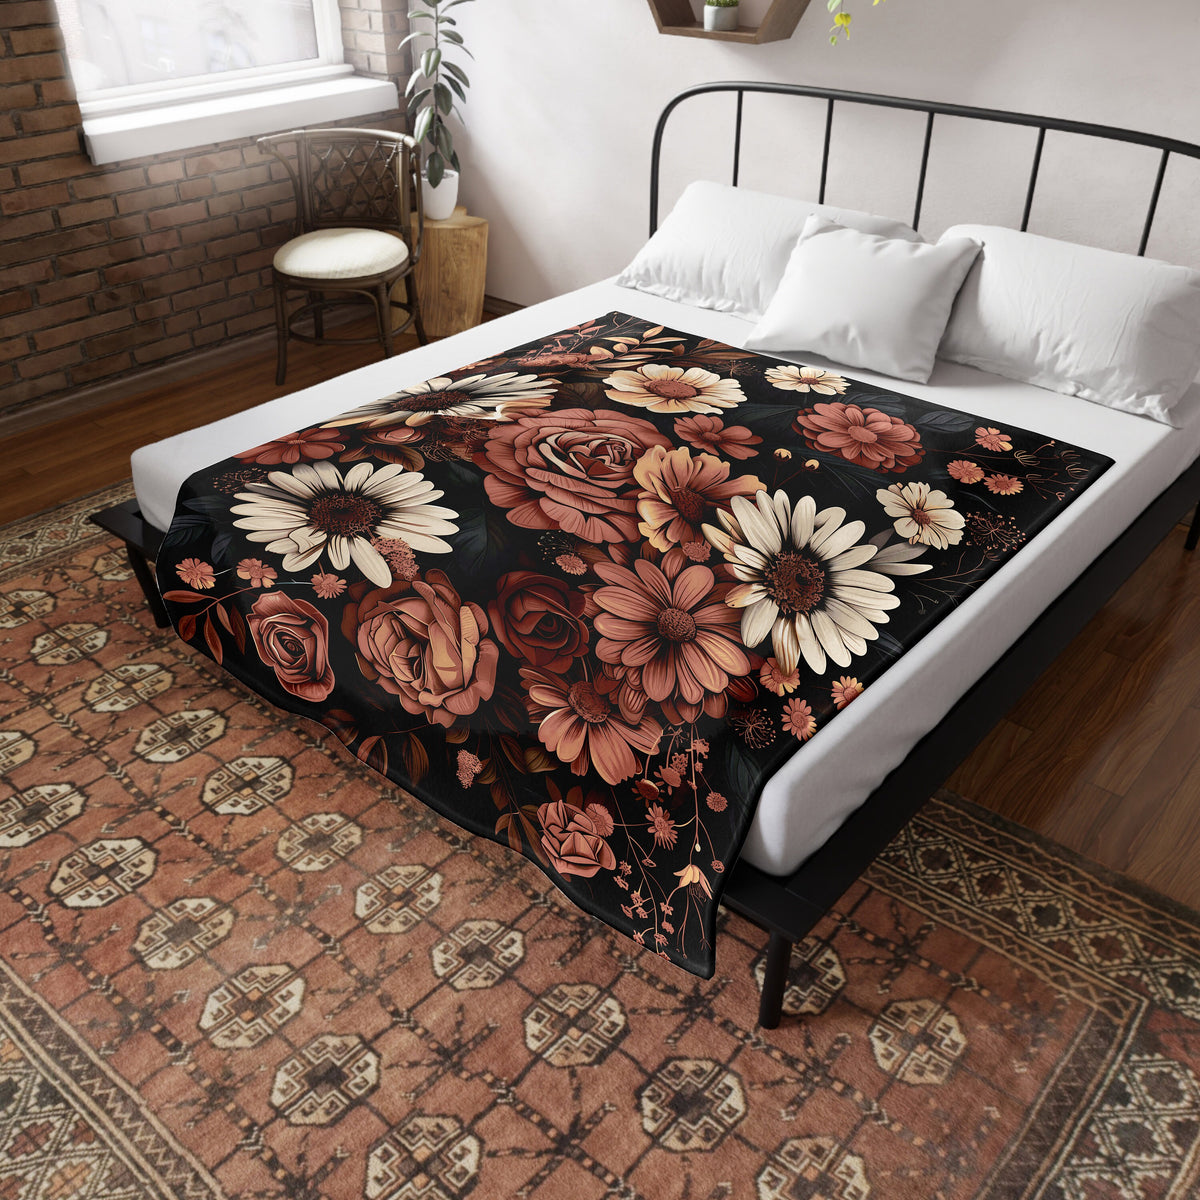 a bed with a floral blanket on top of it